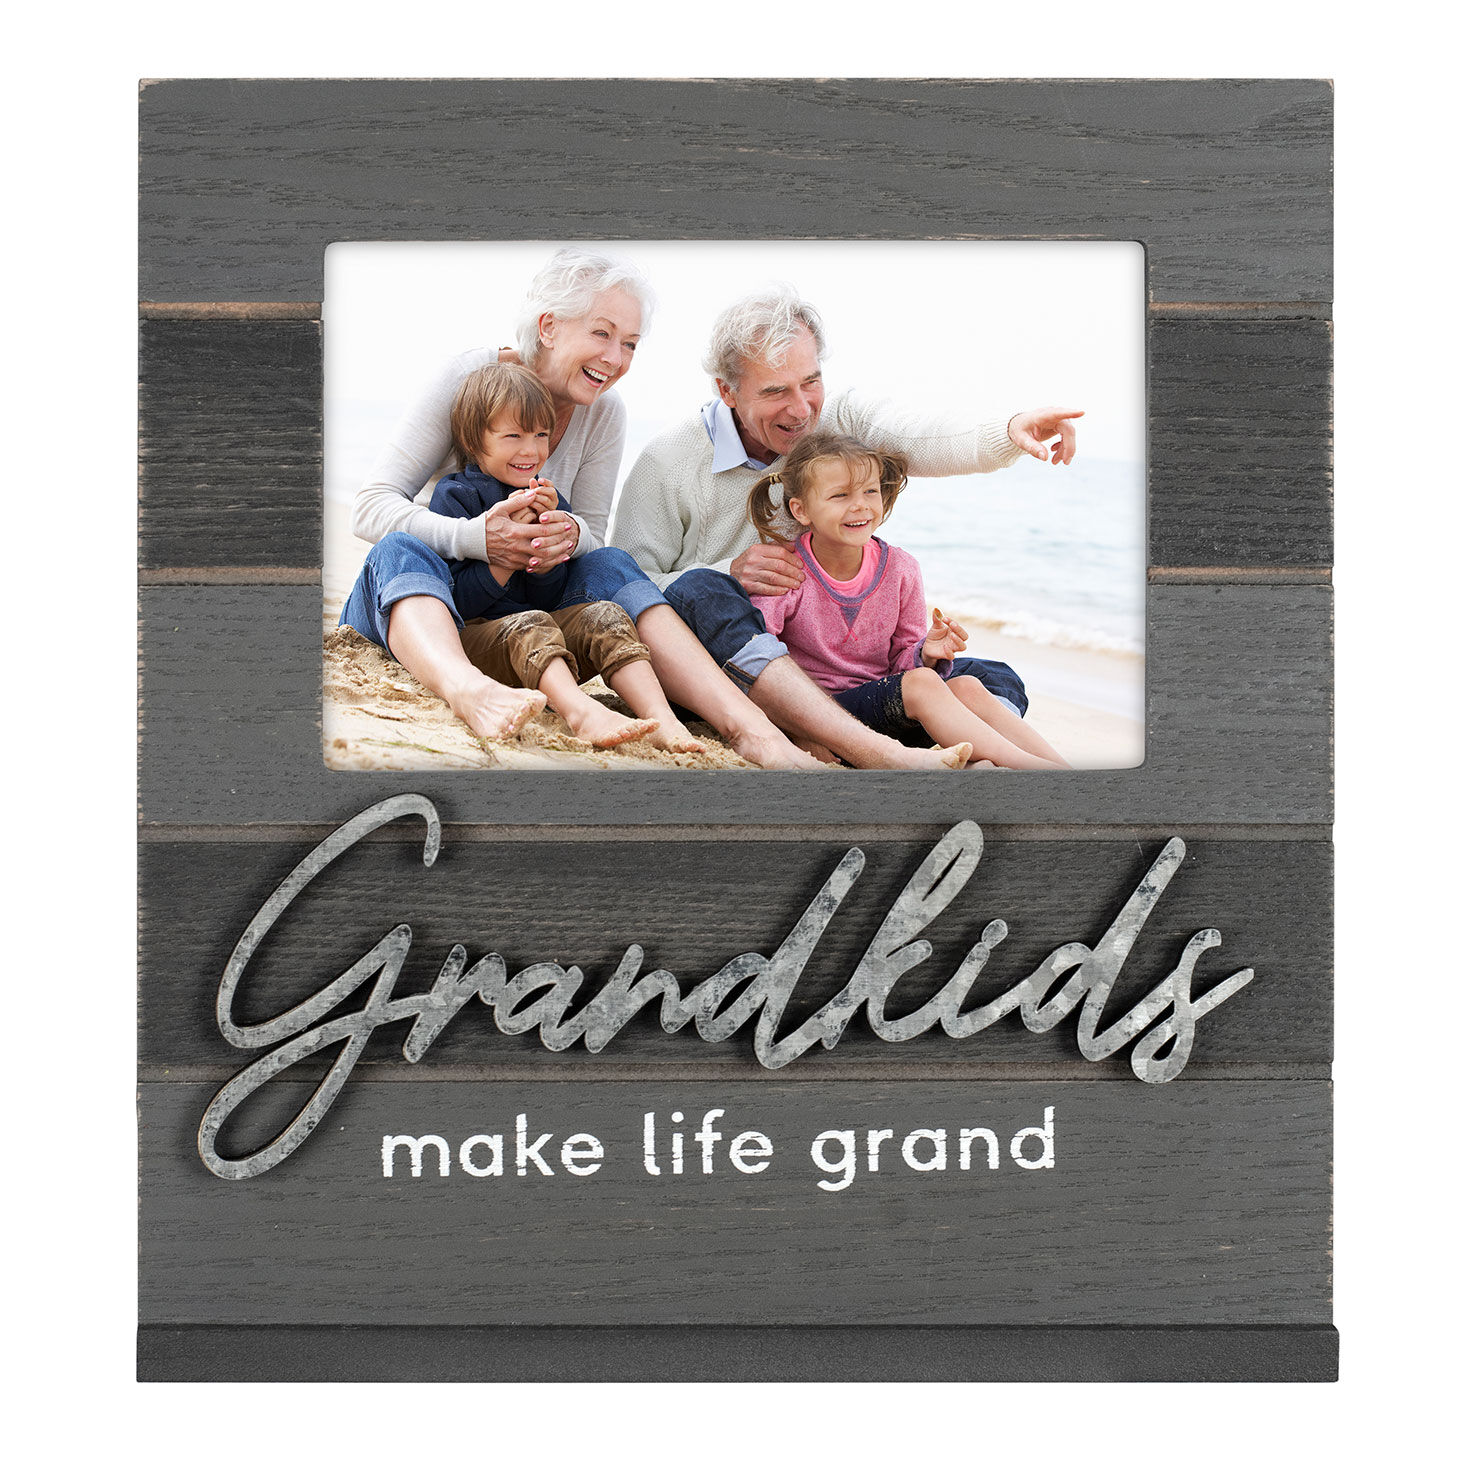 Grandkids Make Life Grand Picture Frame, 4x6 for only USD 19.99 | Hallmark